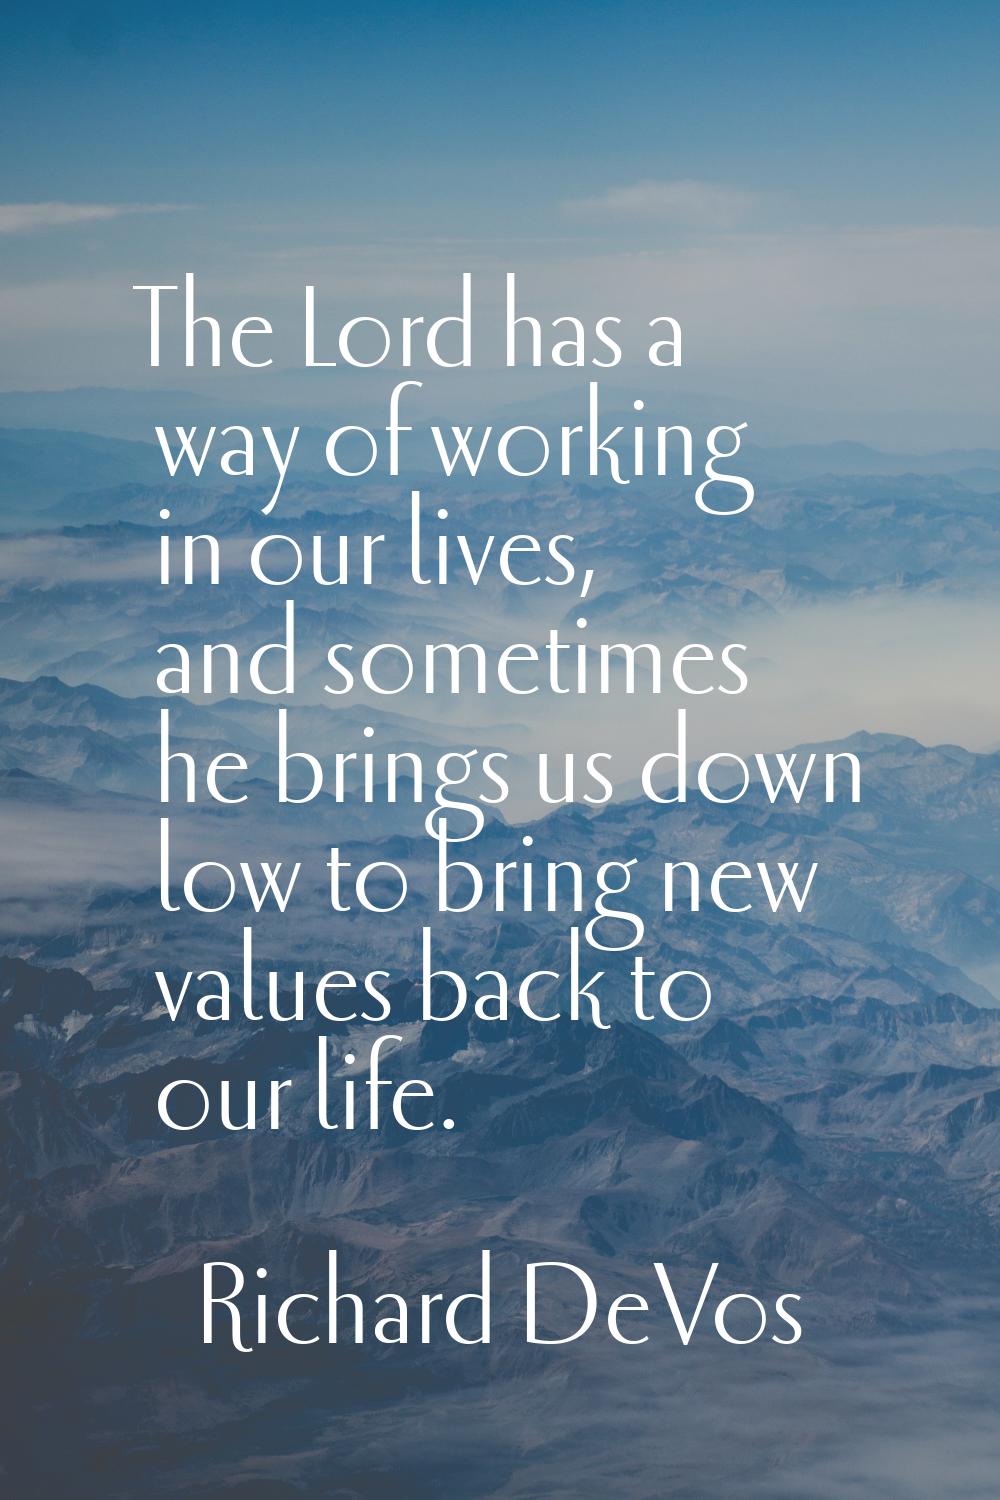 The Lord has a way of working in our lives, and sometimes he brings us down low to bring new values